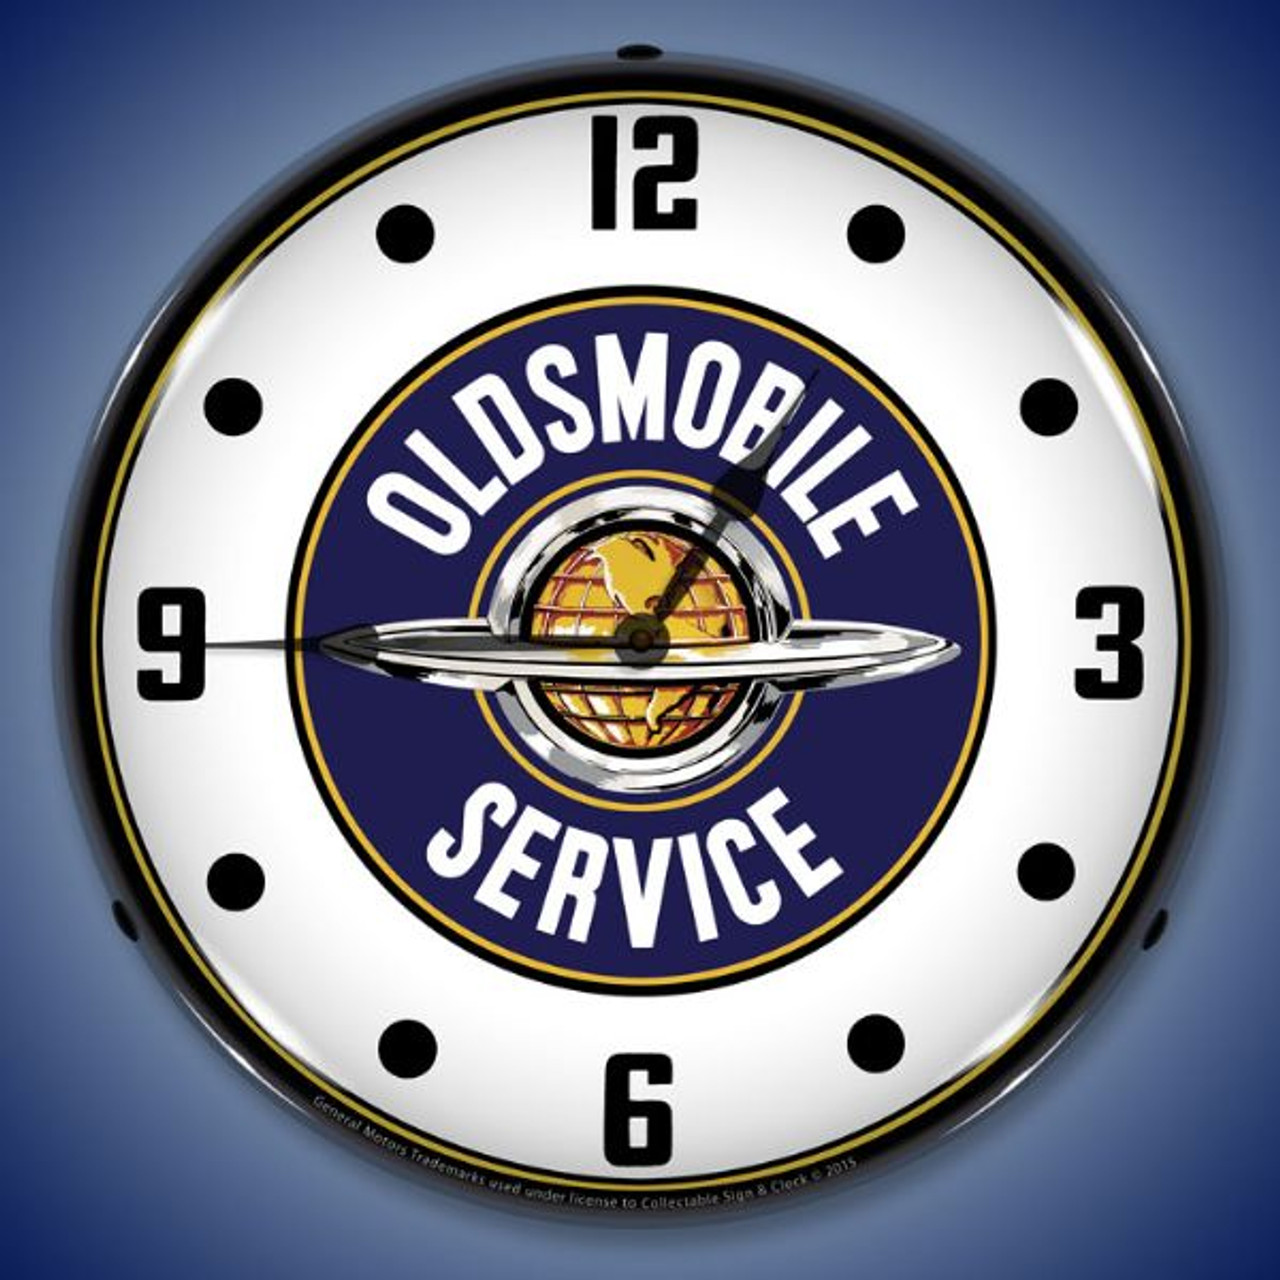 Oldsmobile Service Lighted Wall Clock 14 x 14 Inches